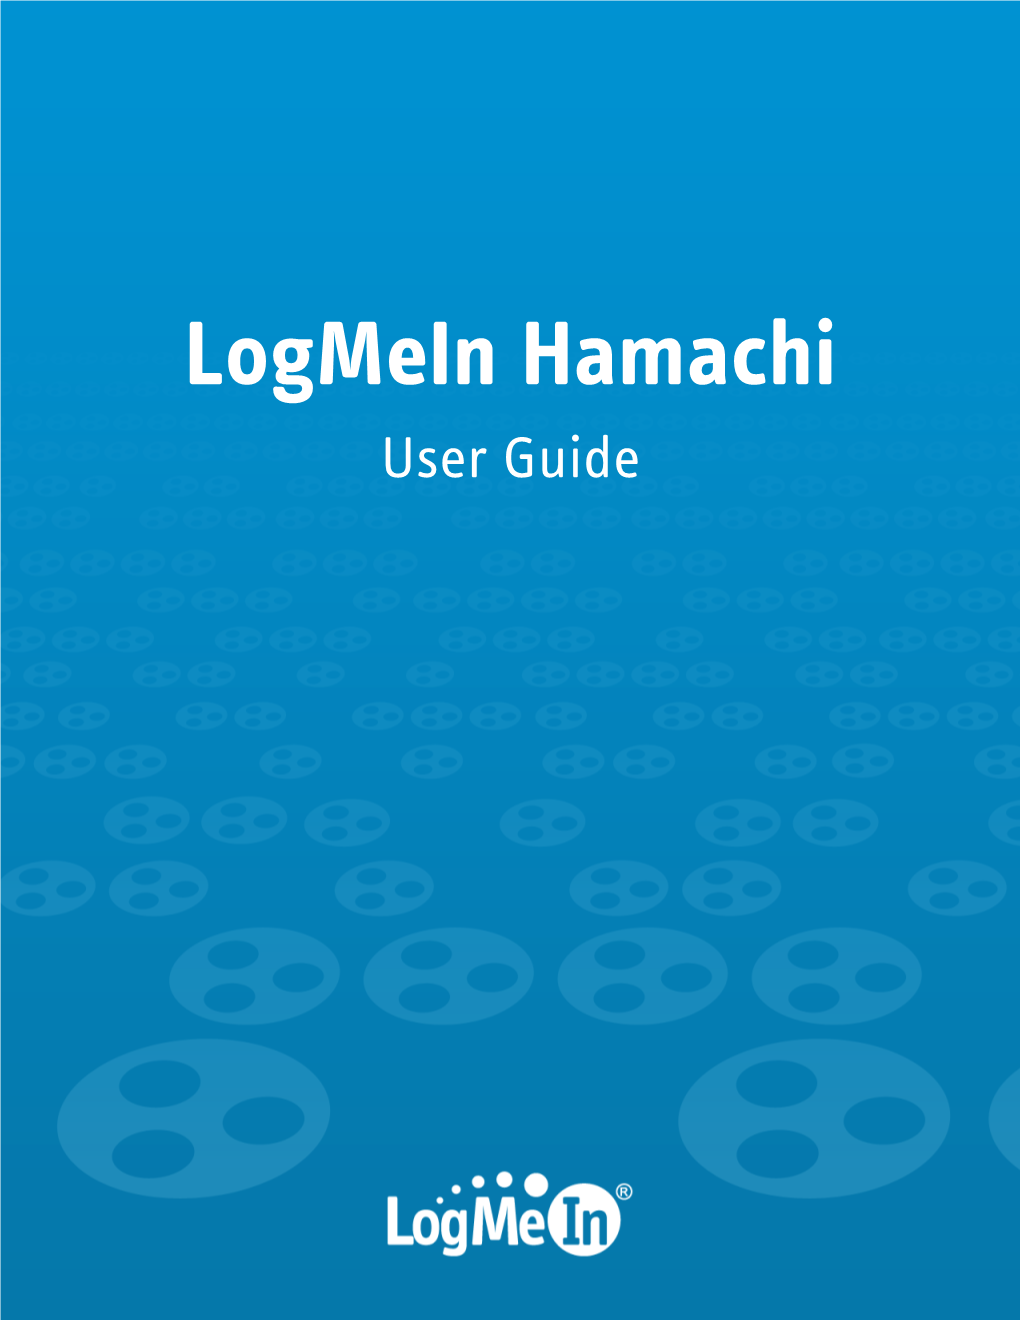 Logmein Hamachi User Guide Contents